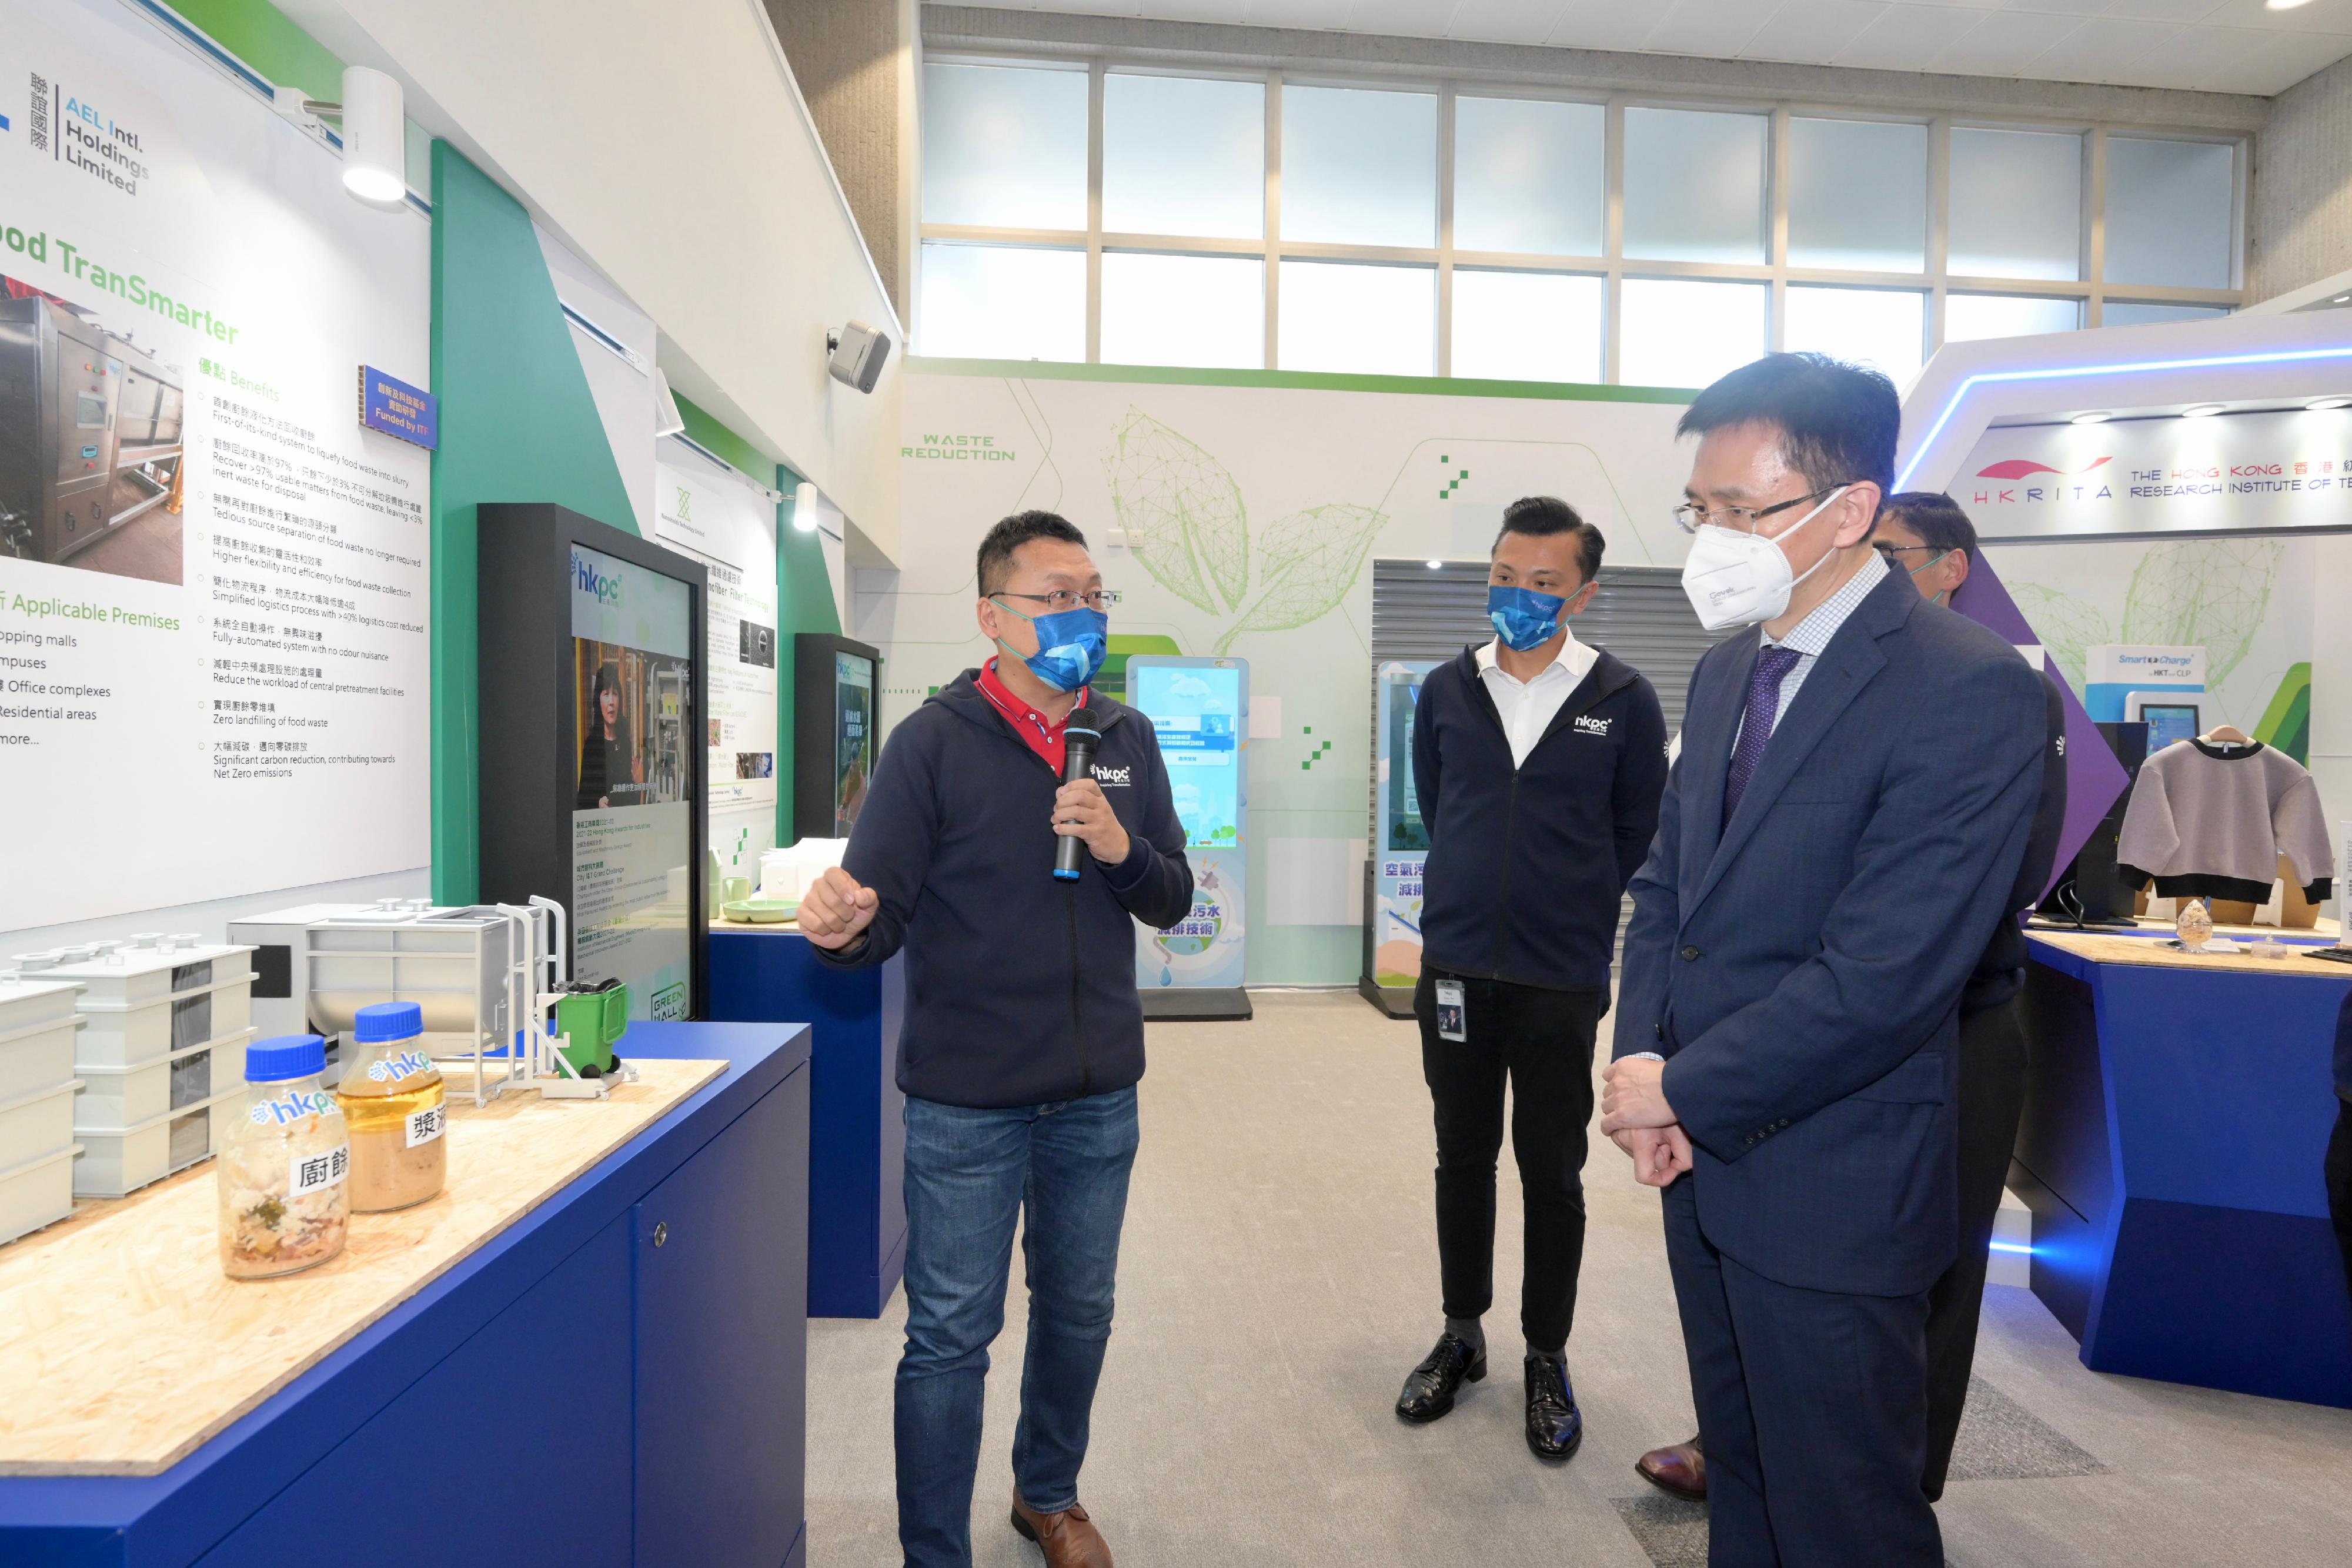 The Secretary for Innovation, Technology and Industry, Professor Sun Dong (right), tours the Green Hall during his visit to the Hong Kong Productivity Council (HKPC) today (July 8) and receives a briefing on the technology used. Also present is the Chairman of the HKPC (designate), Mr Sunny Tan (centre).